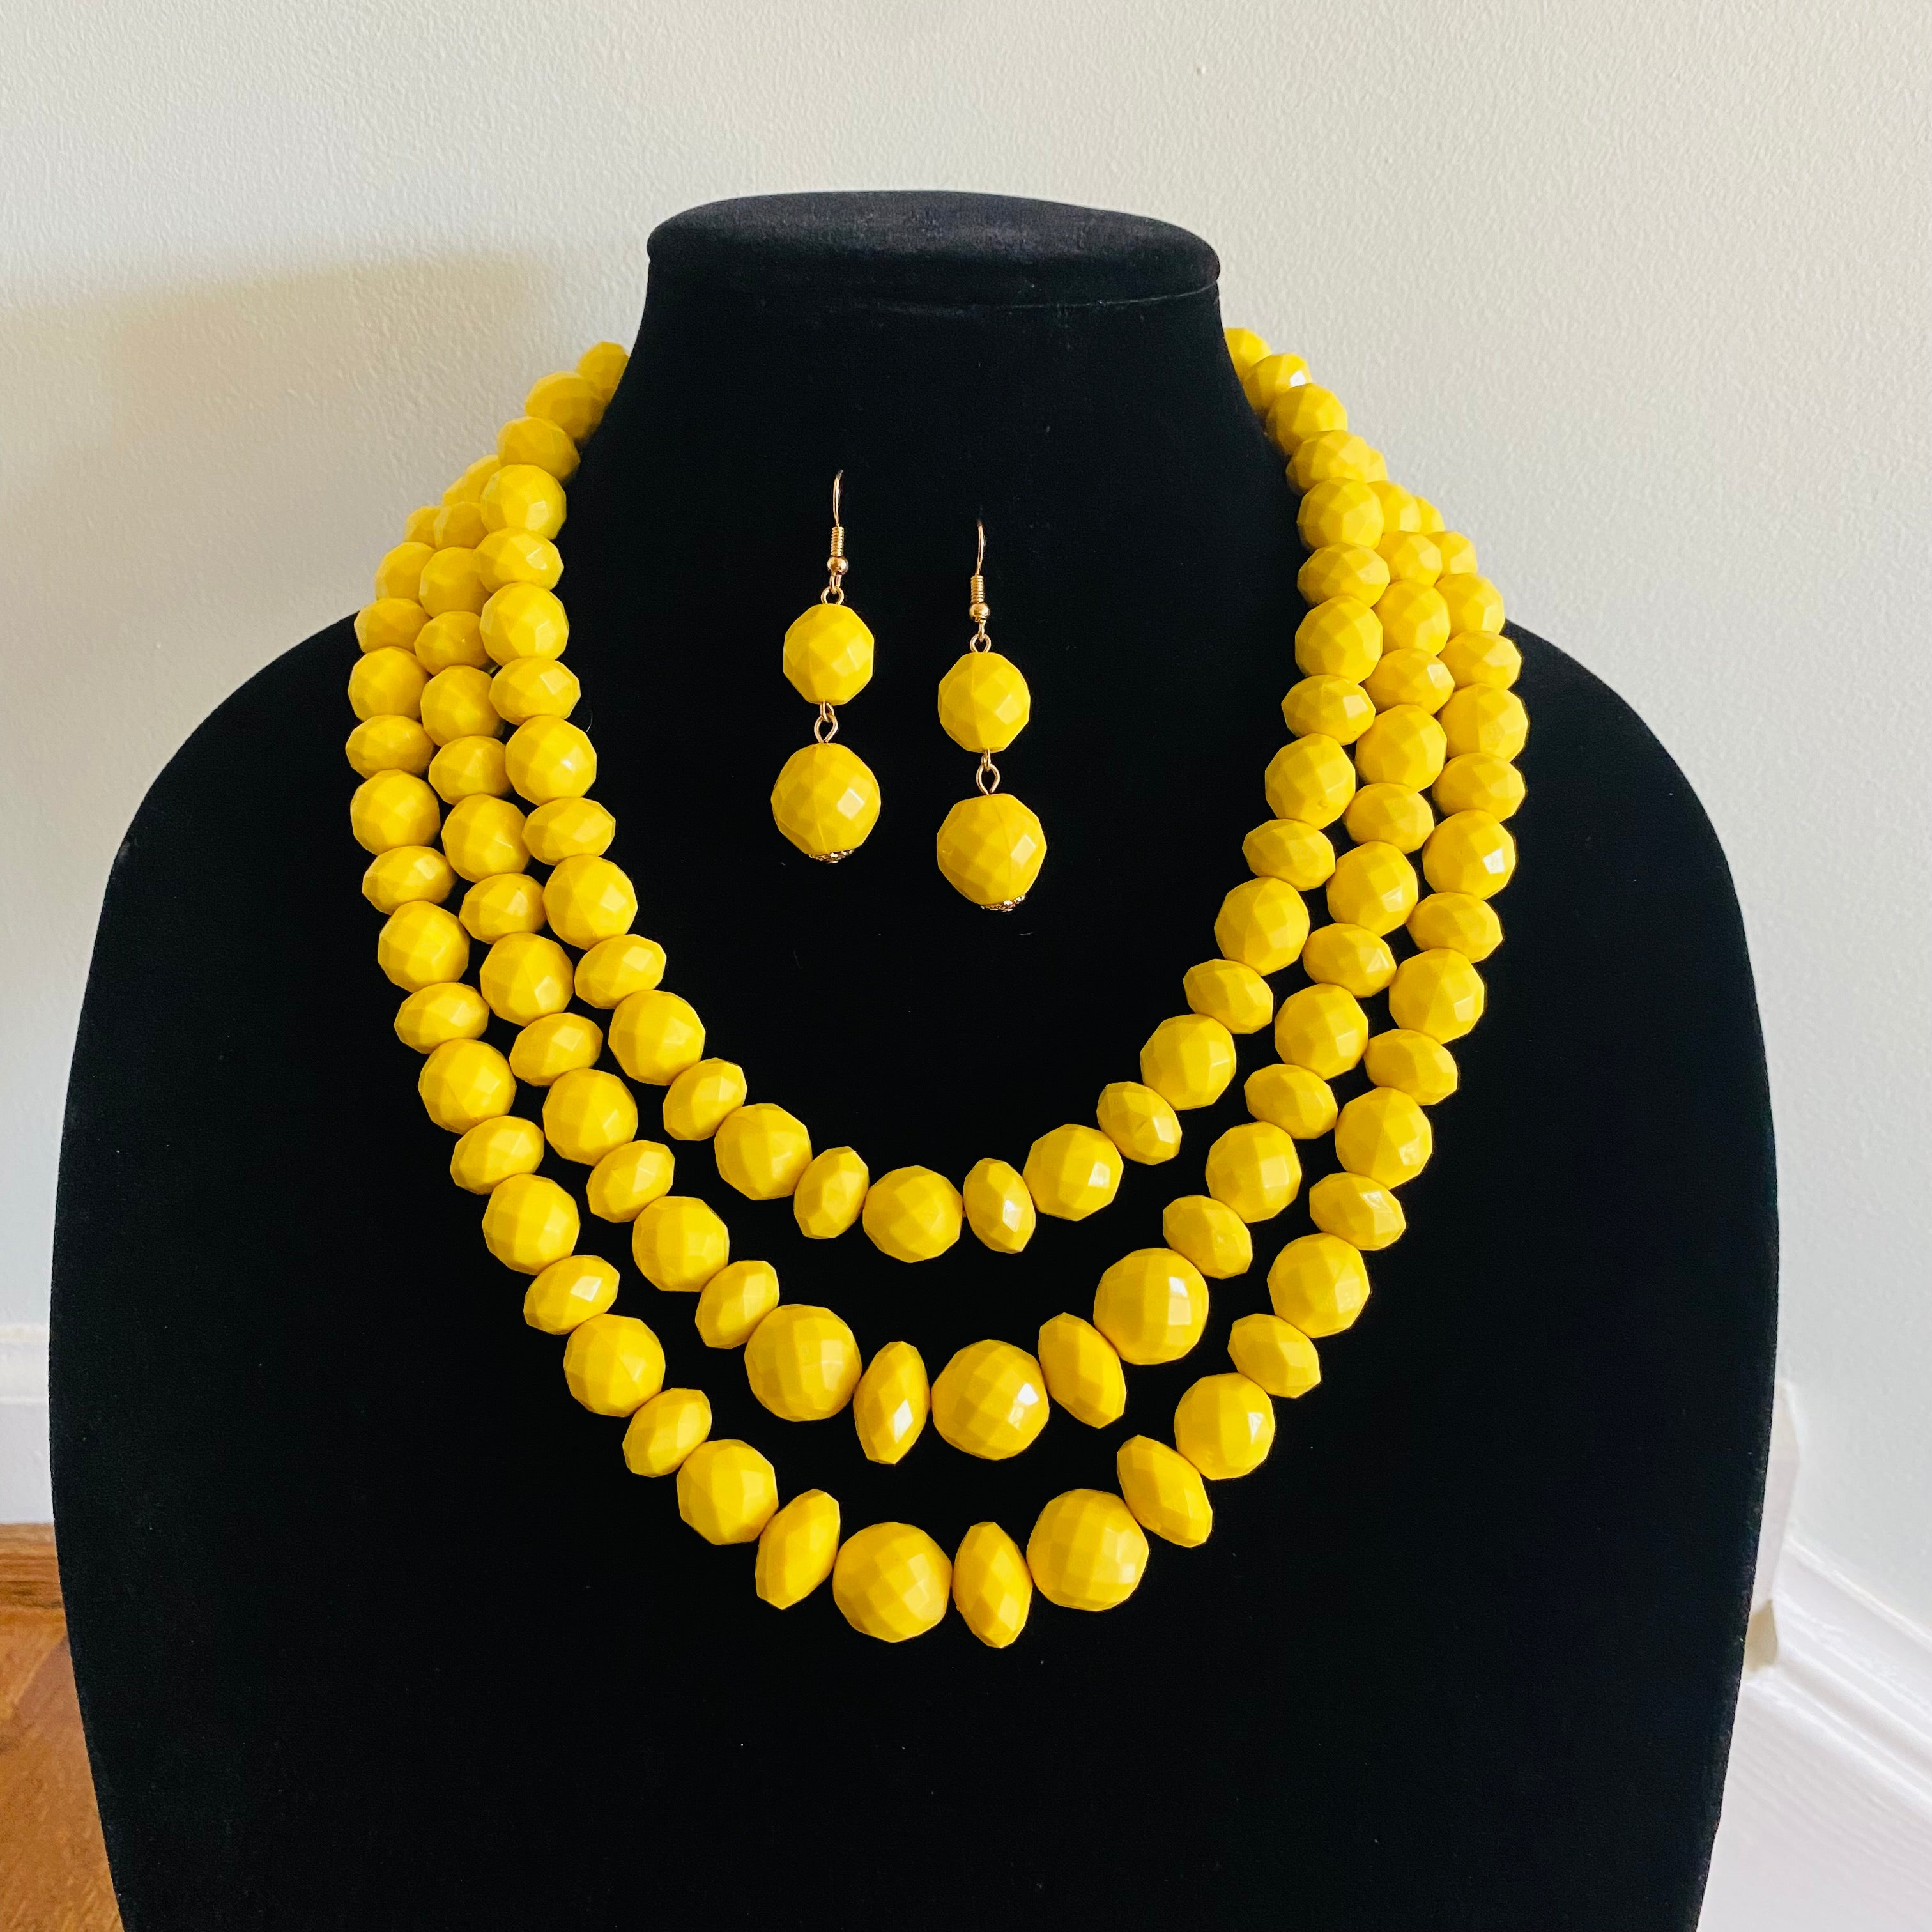 Veronica Necklace Sets w/ Earrings and bracelets